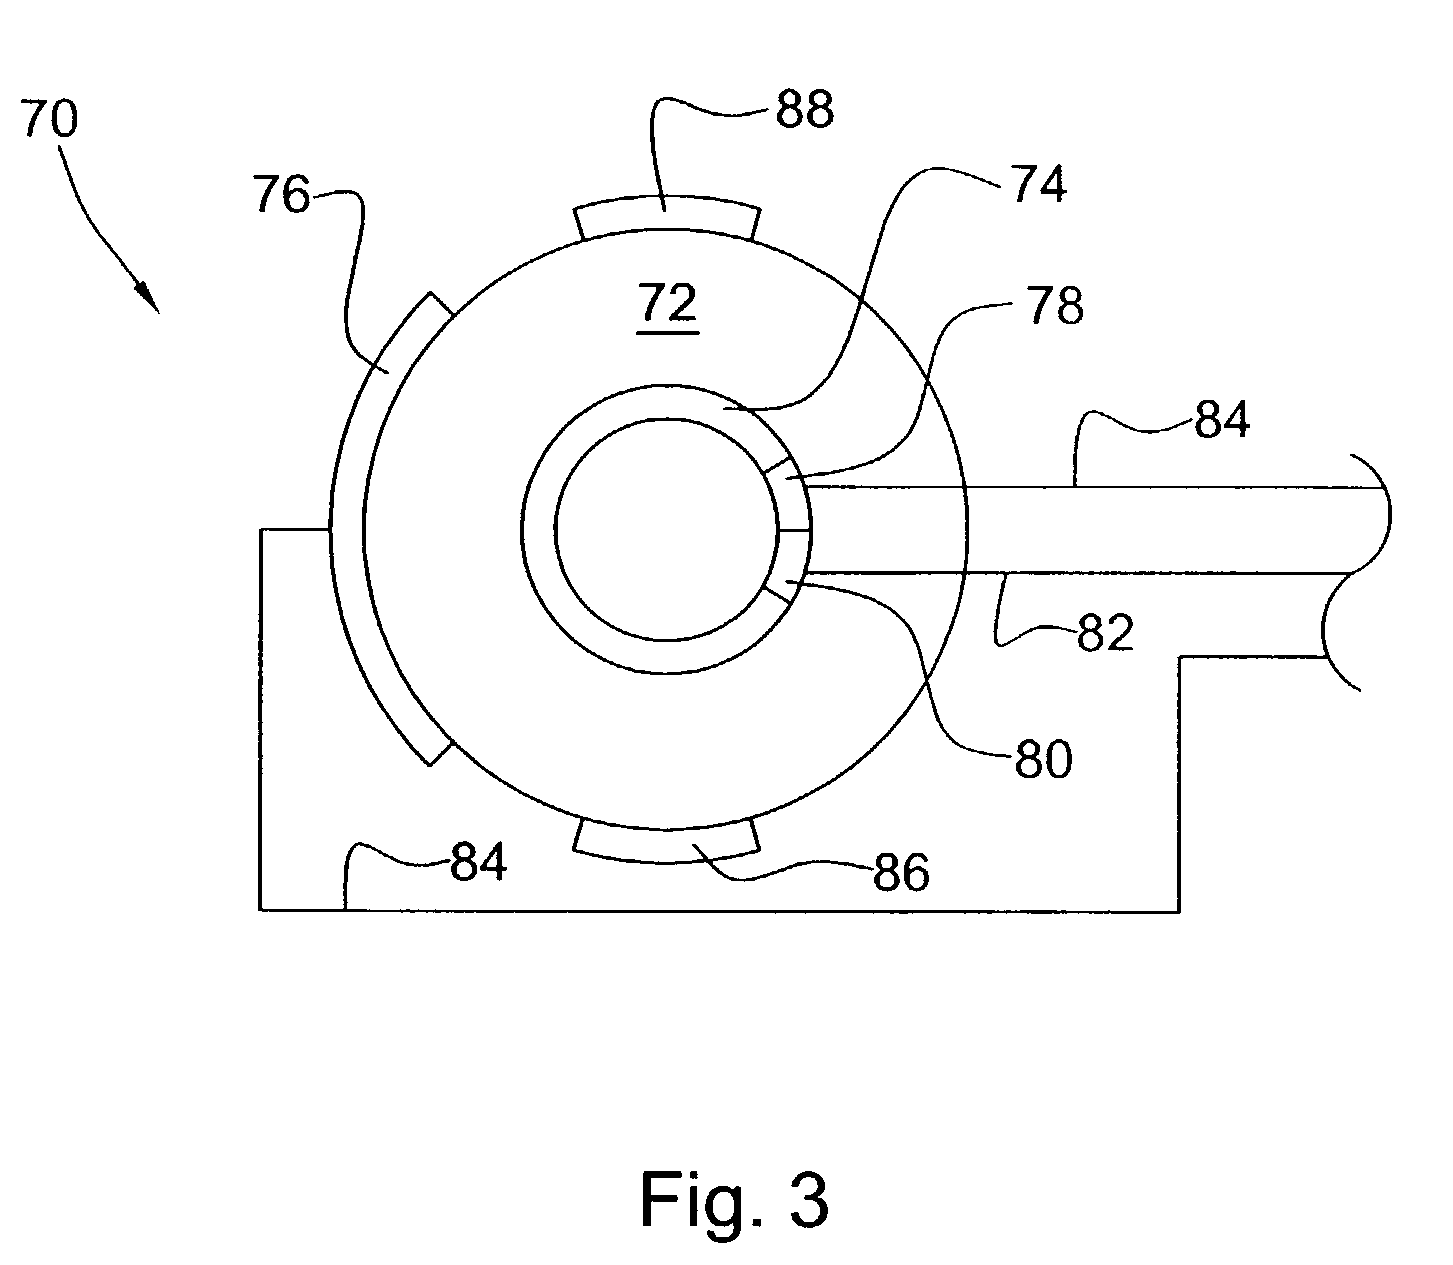 Control system for catalytic processes